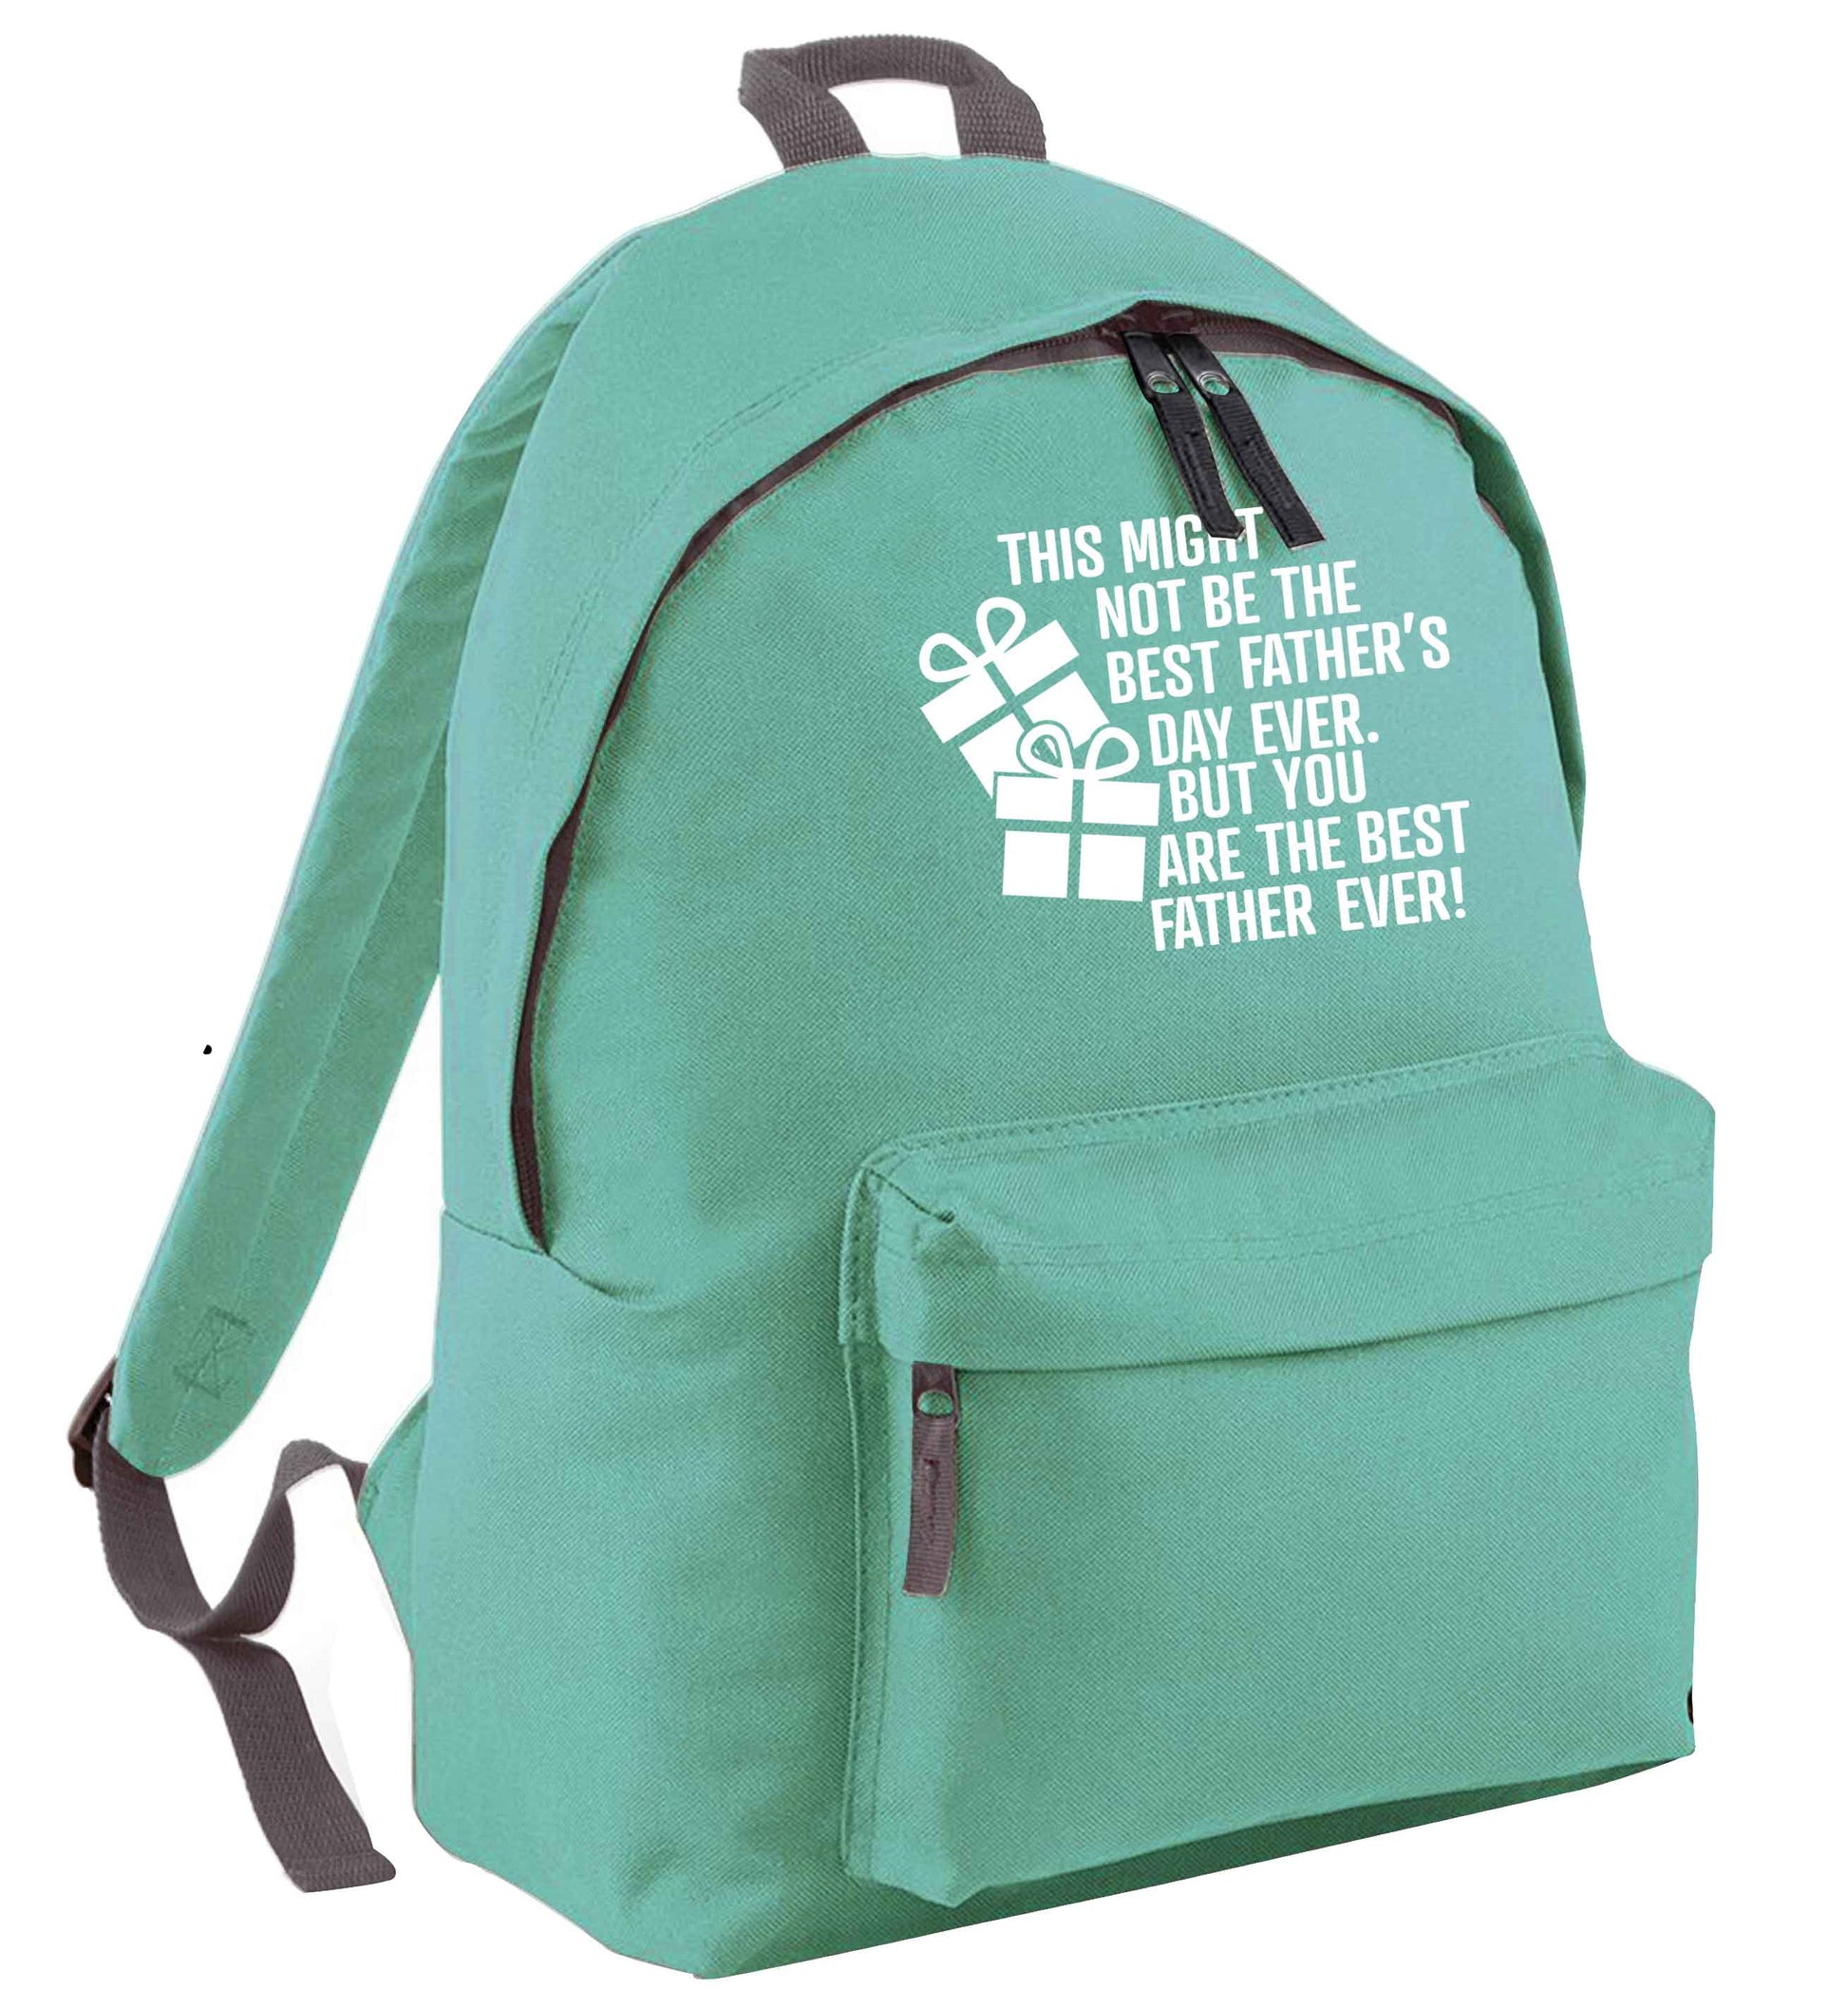 It might not be the best Father's Day ever but you are the best father ever! mint adults backpack